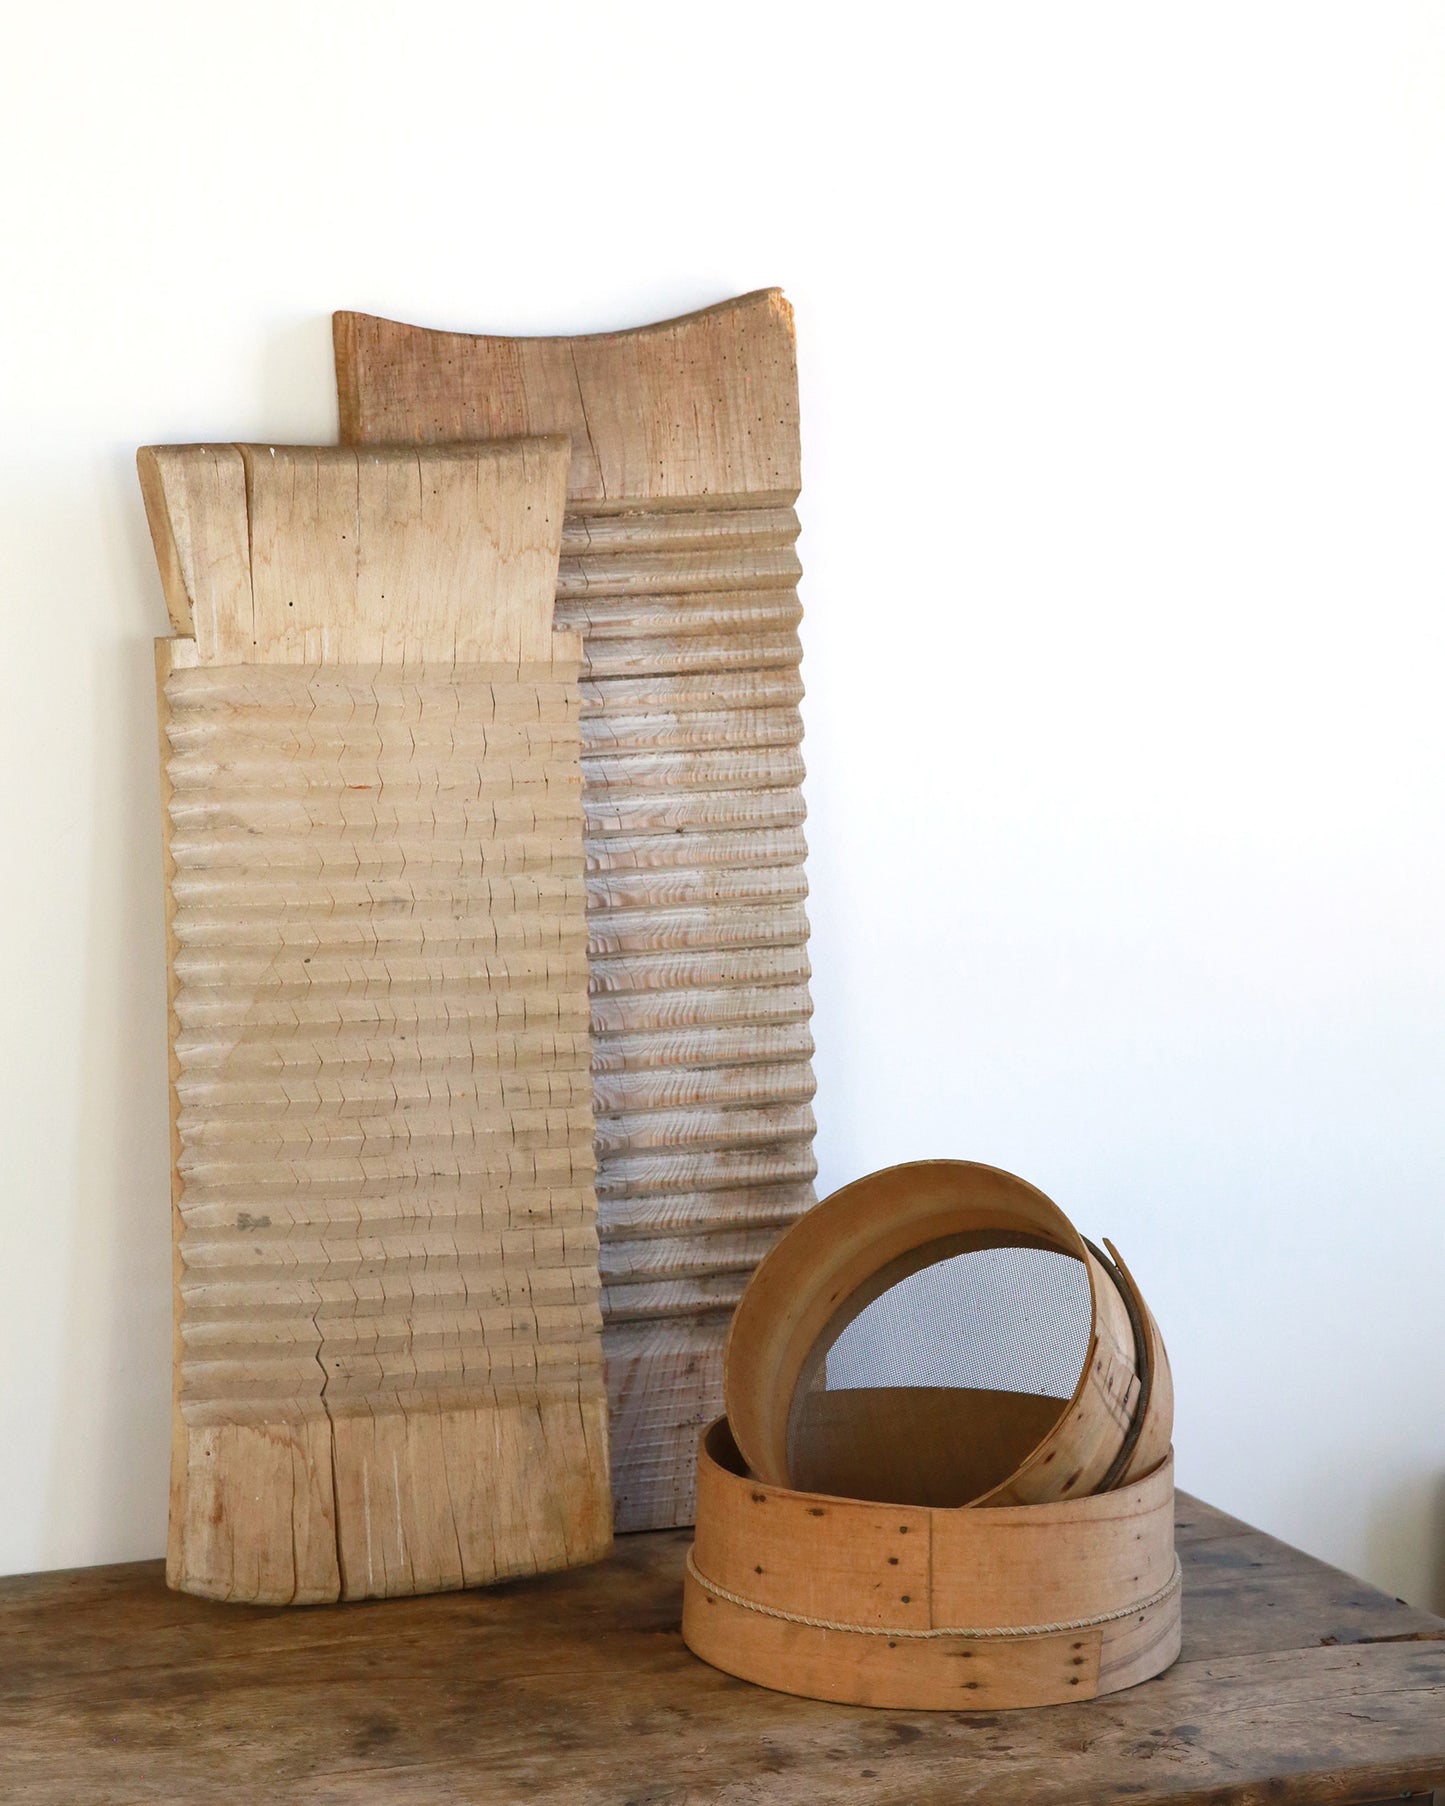 Vintage wooden washboards styled with rustic homewares